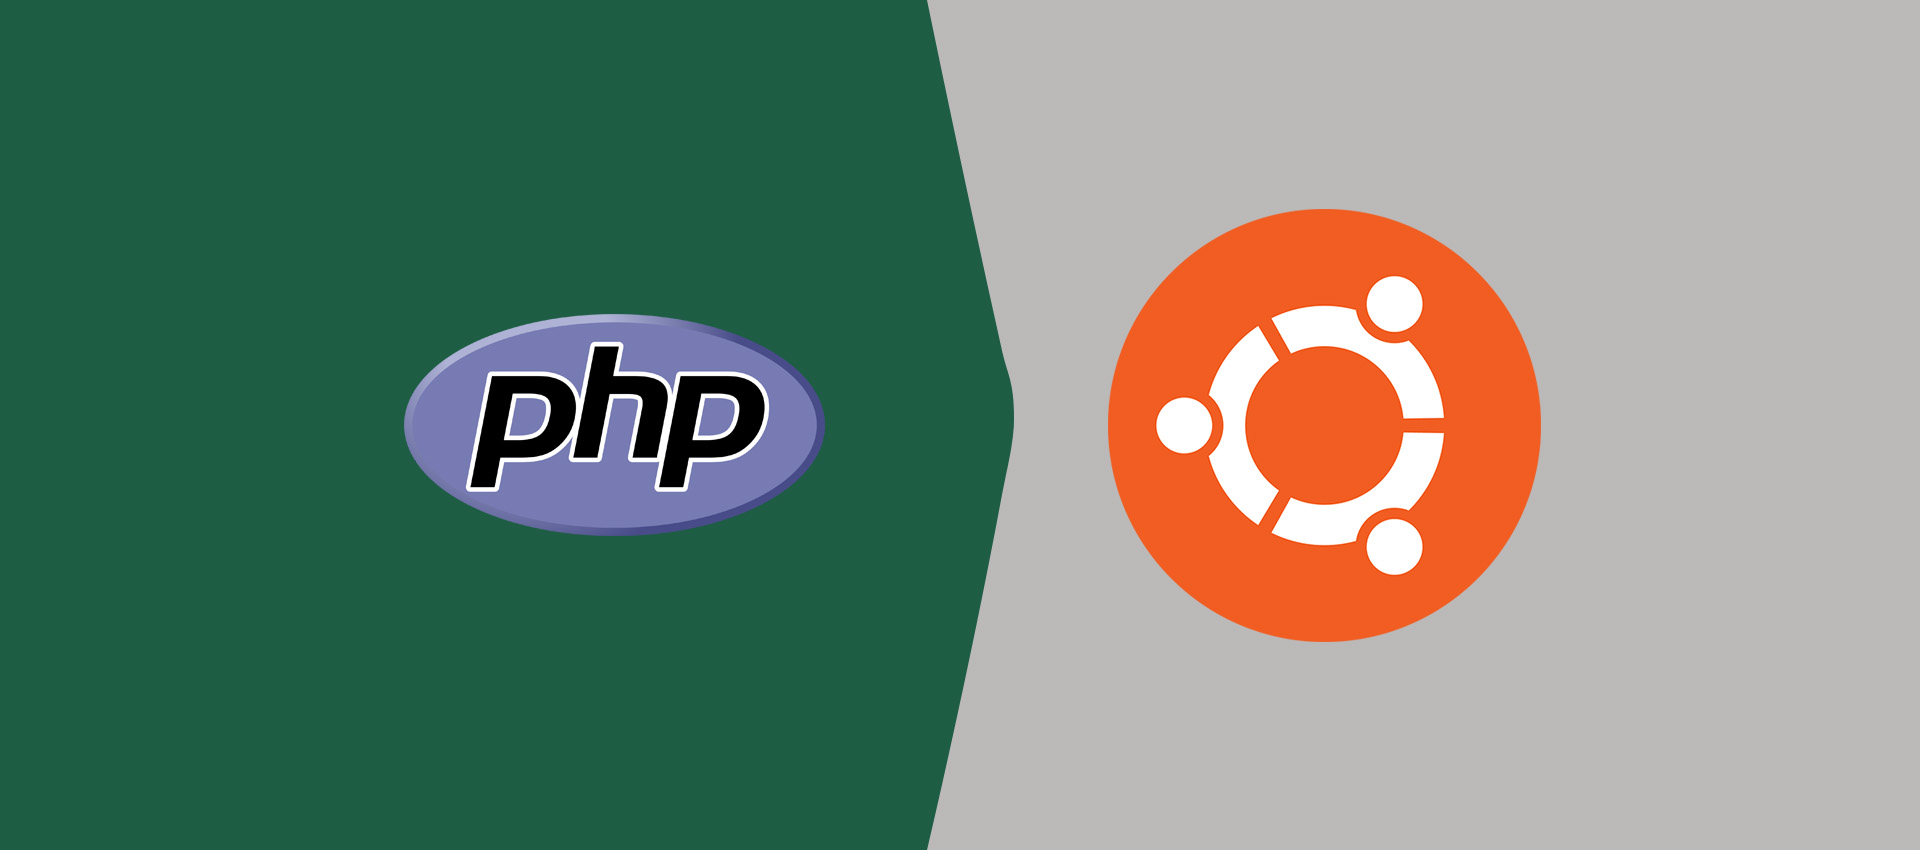 How To Install PHP 7 On Ubuntu 18.04 LTS